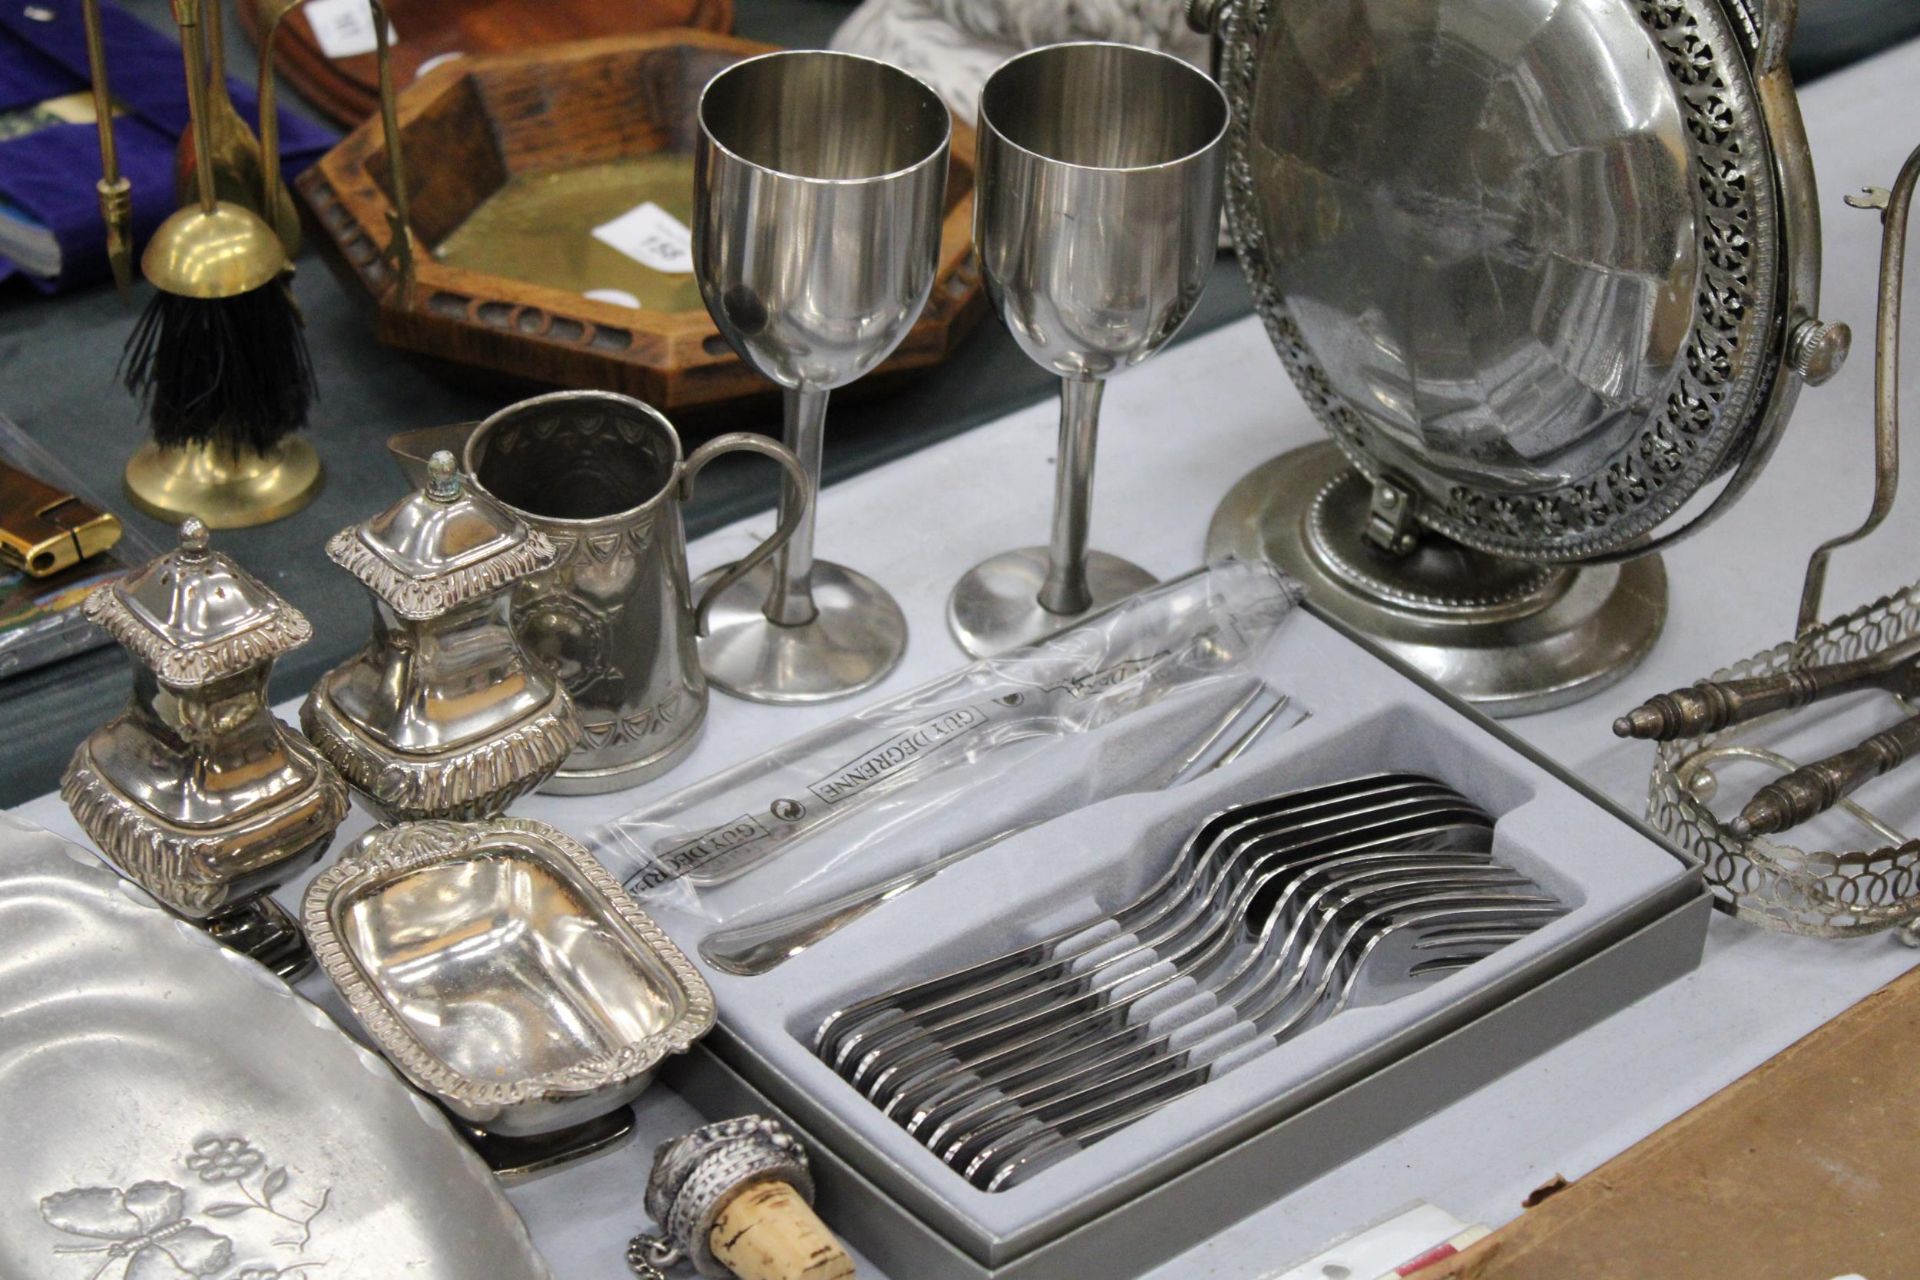 A QUANTITY OF SILVER PLATED AND METAL ITEMS TO INCLUDE GOBLETS, A CRUET SET, DISHES, FLATWARE, ETC - Image 5 of 5